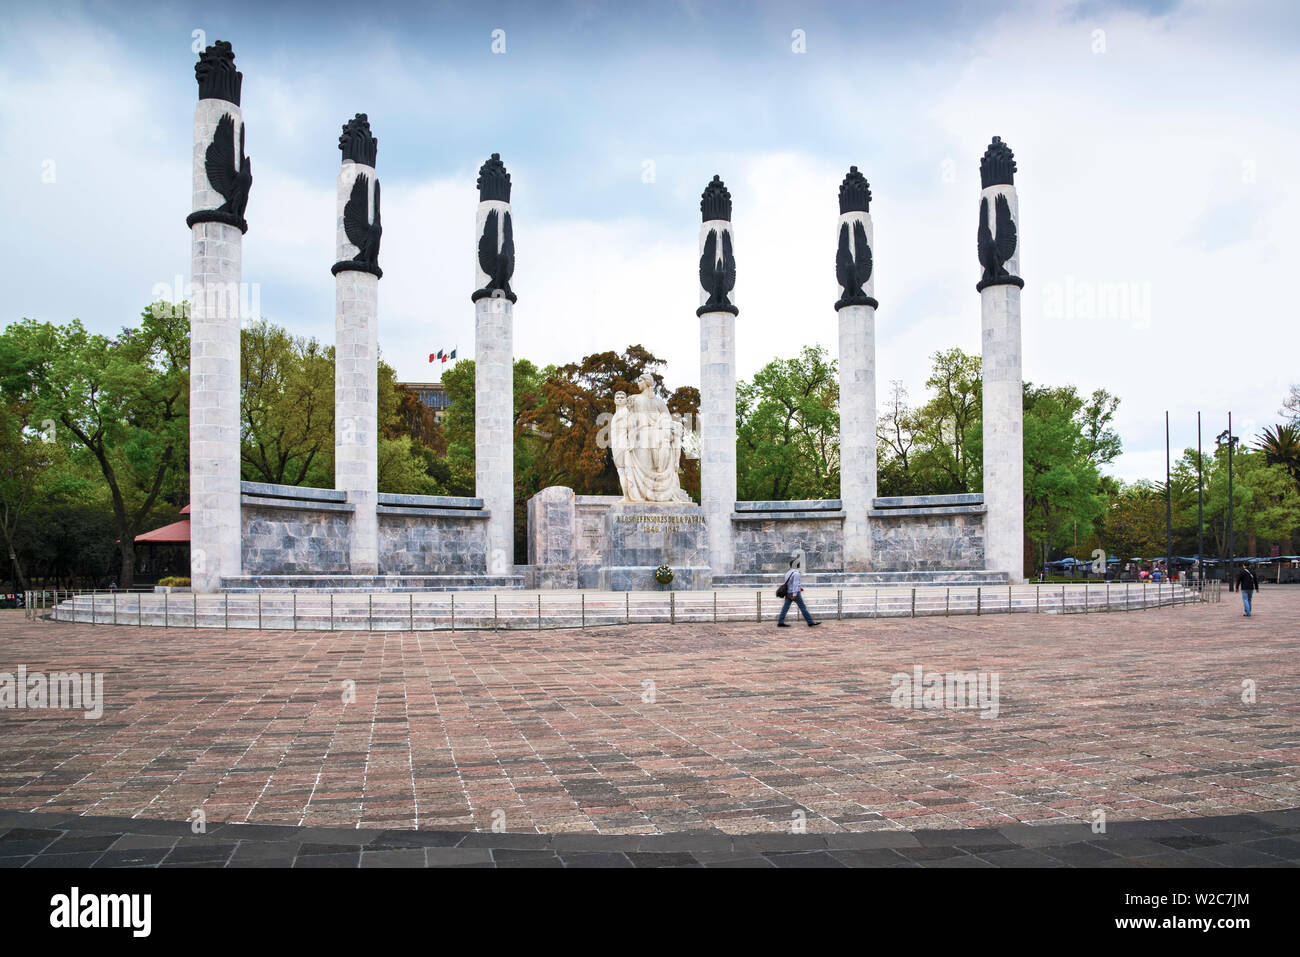 Mexico, Mexico City, Monument to Los Ninos Heroes, Heroic Children, Altar a la Patria, In The Defense Of The Homeland, Six Young Cadets Died Defending Chapultepec Castle During the Mexican-American War, Entrance To Chapultepec Castle Stock Photo